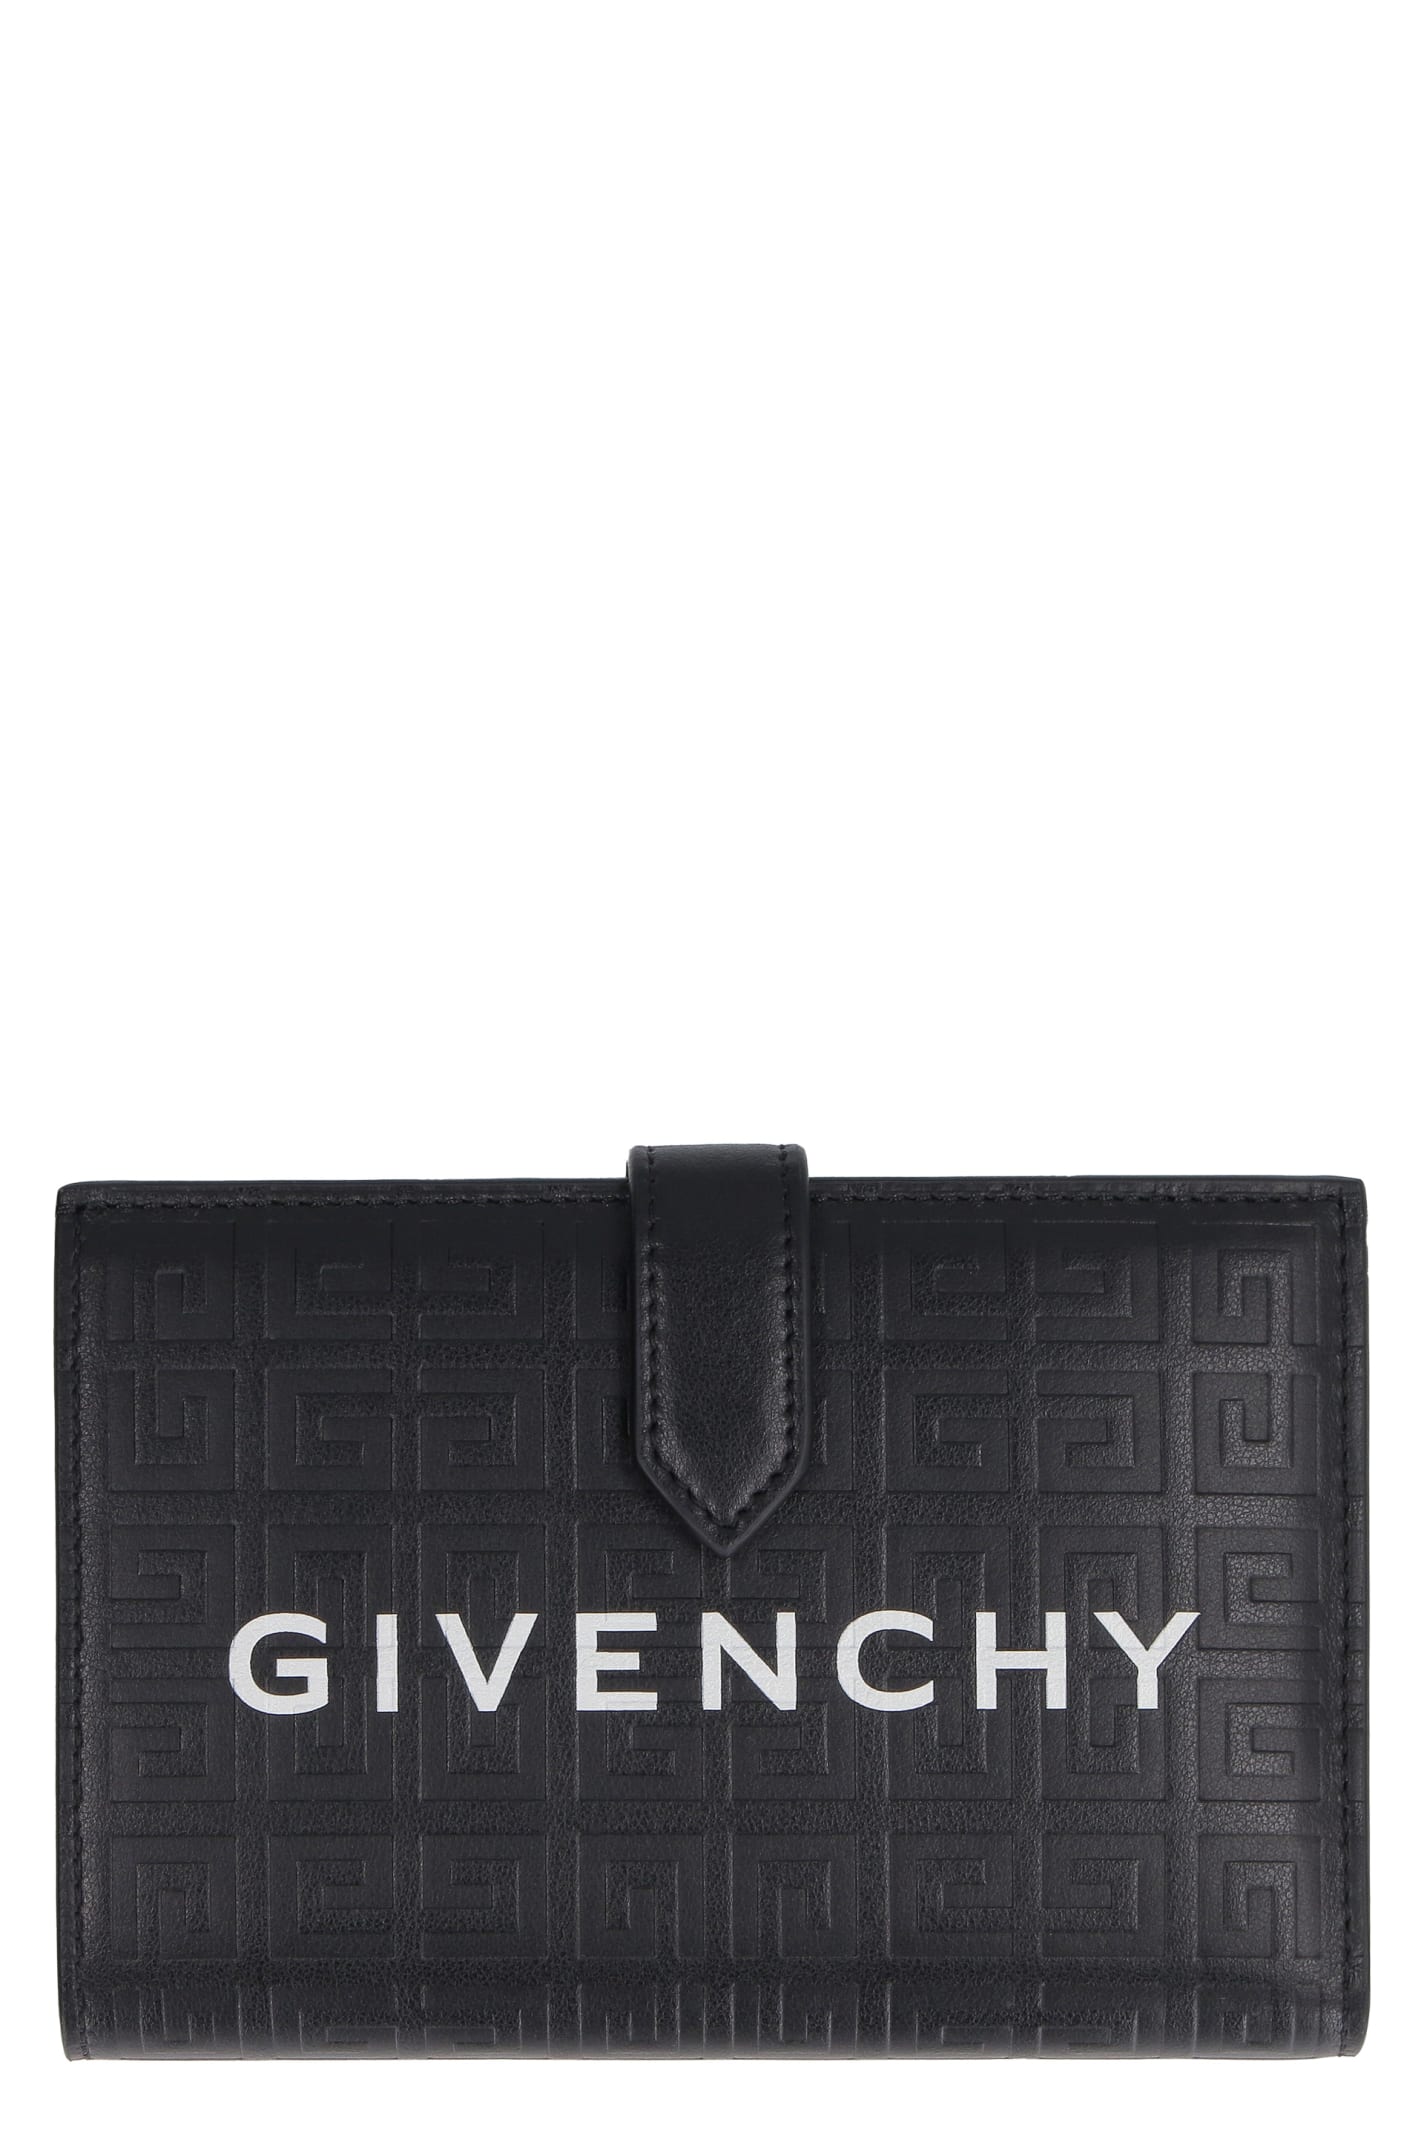 Givenchy G Cut Leather Wallet